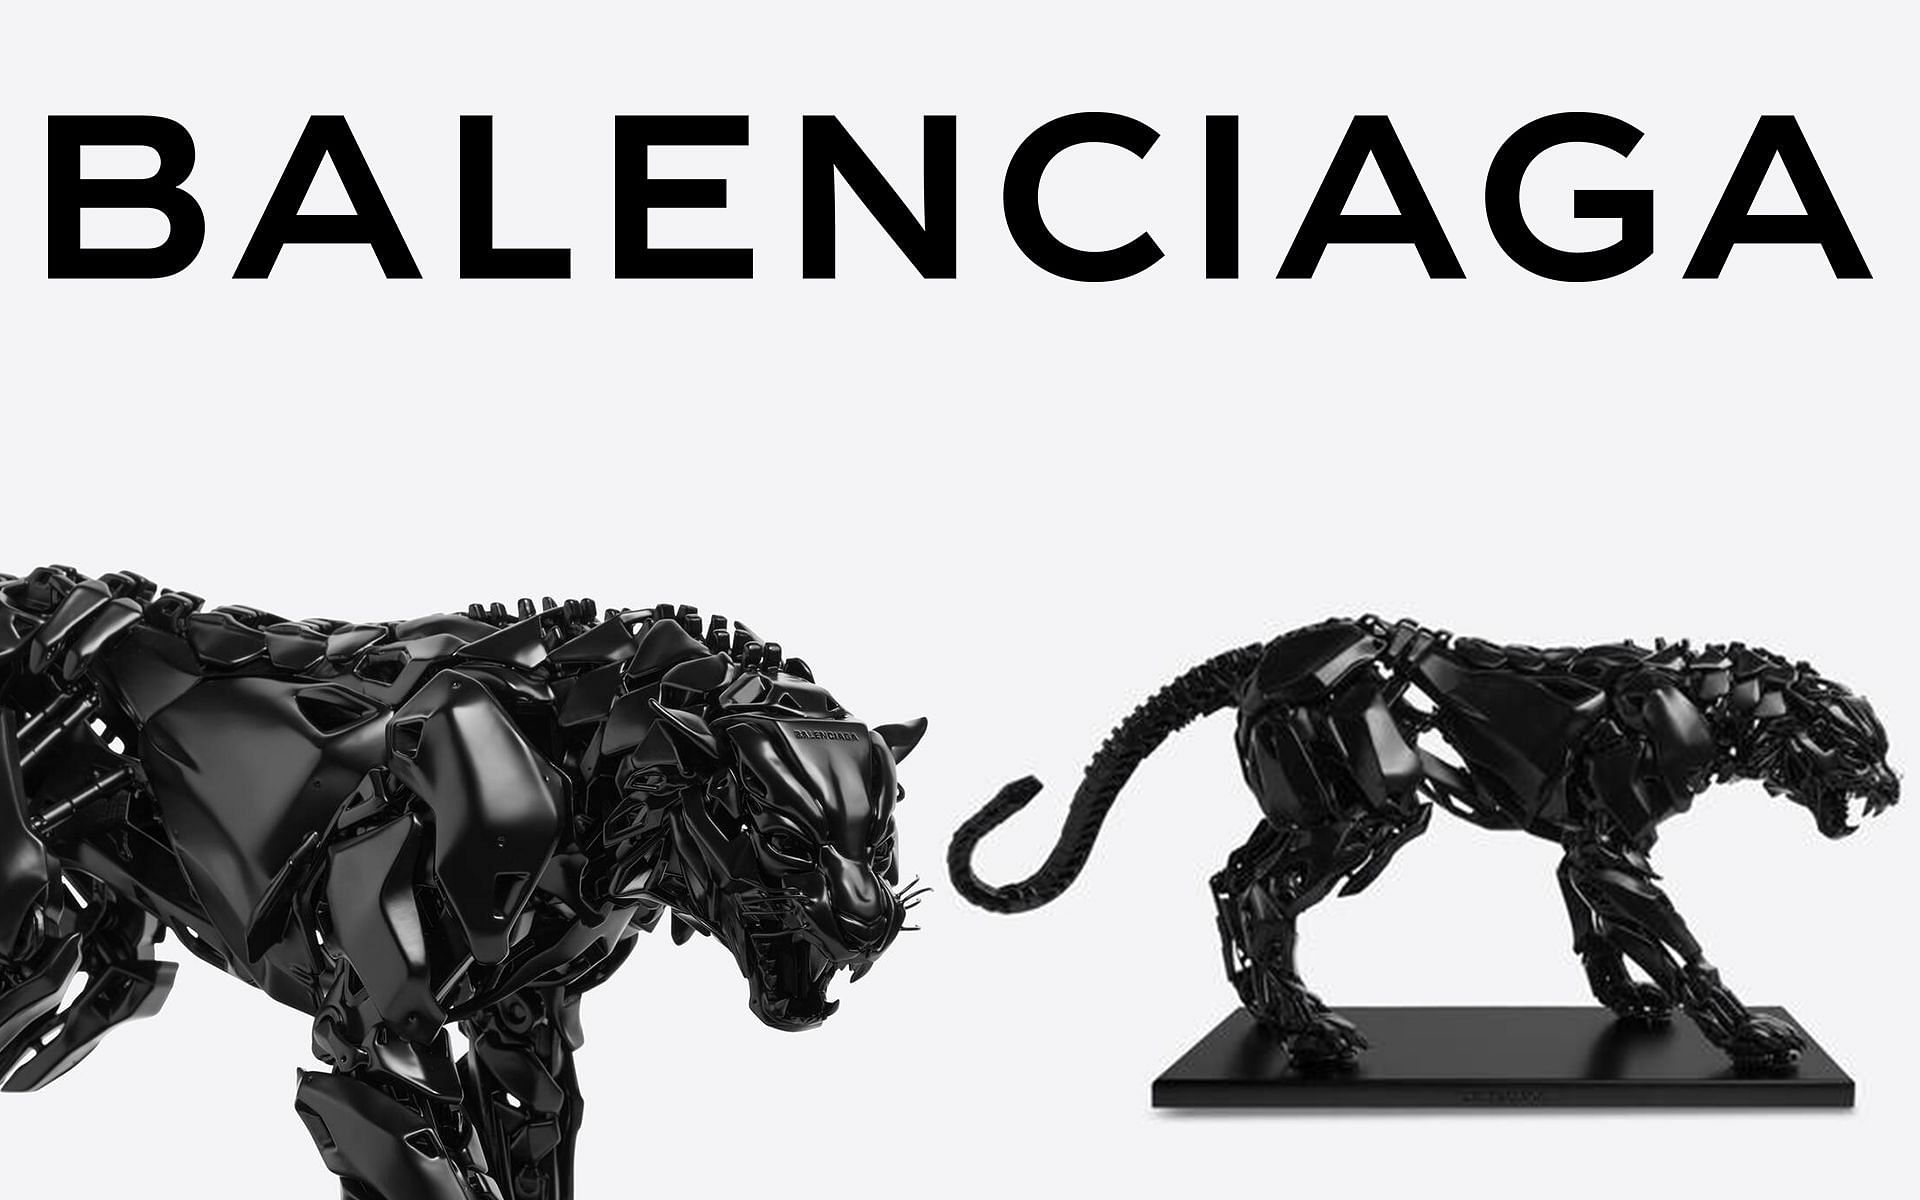 Balenciaga adds a tiger sculpture to its Objects line (Image by Sportskeeda)